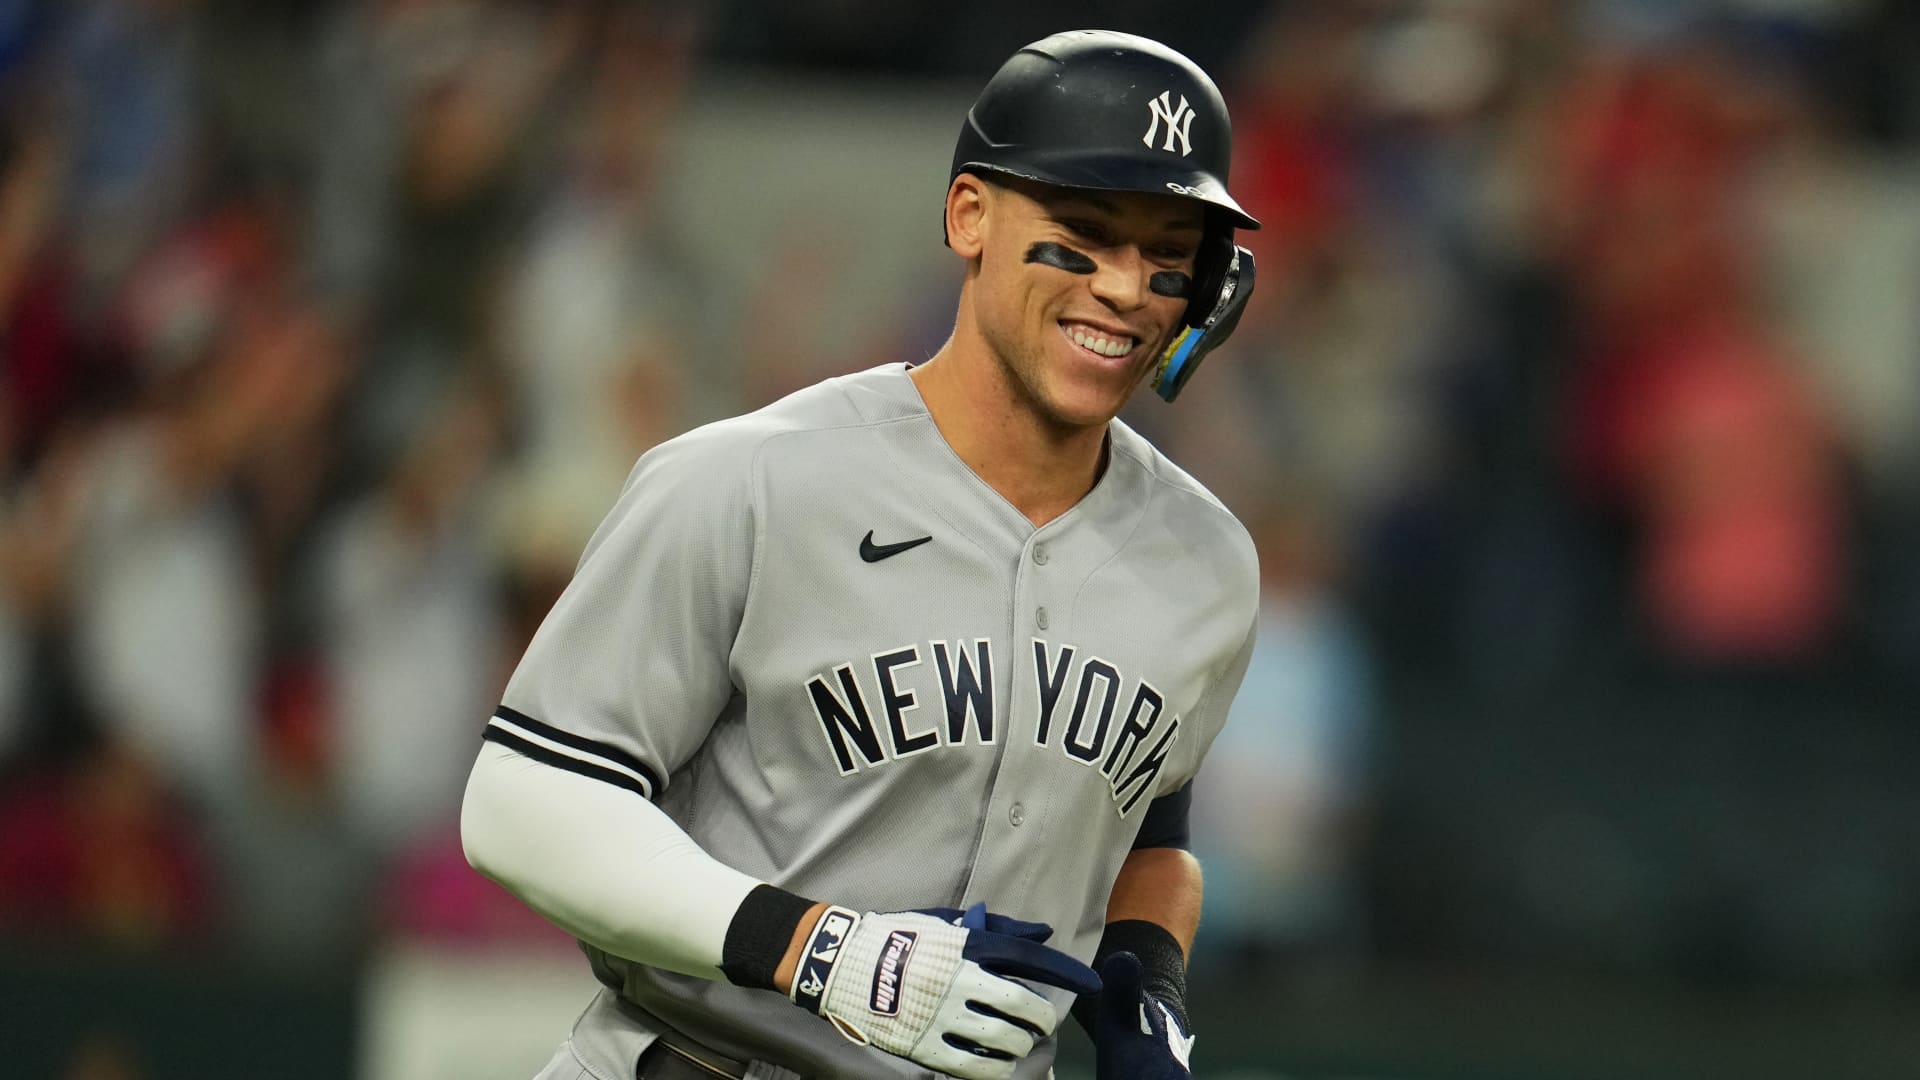 Aaron Judge signs record-breaking deal to stay with the Yankees—how his salary stacks up against other top players - CNBC